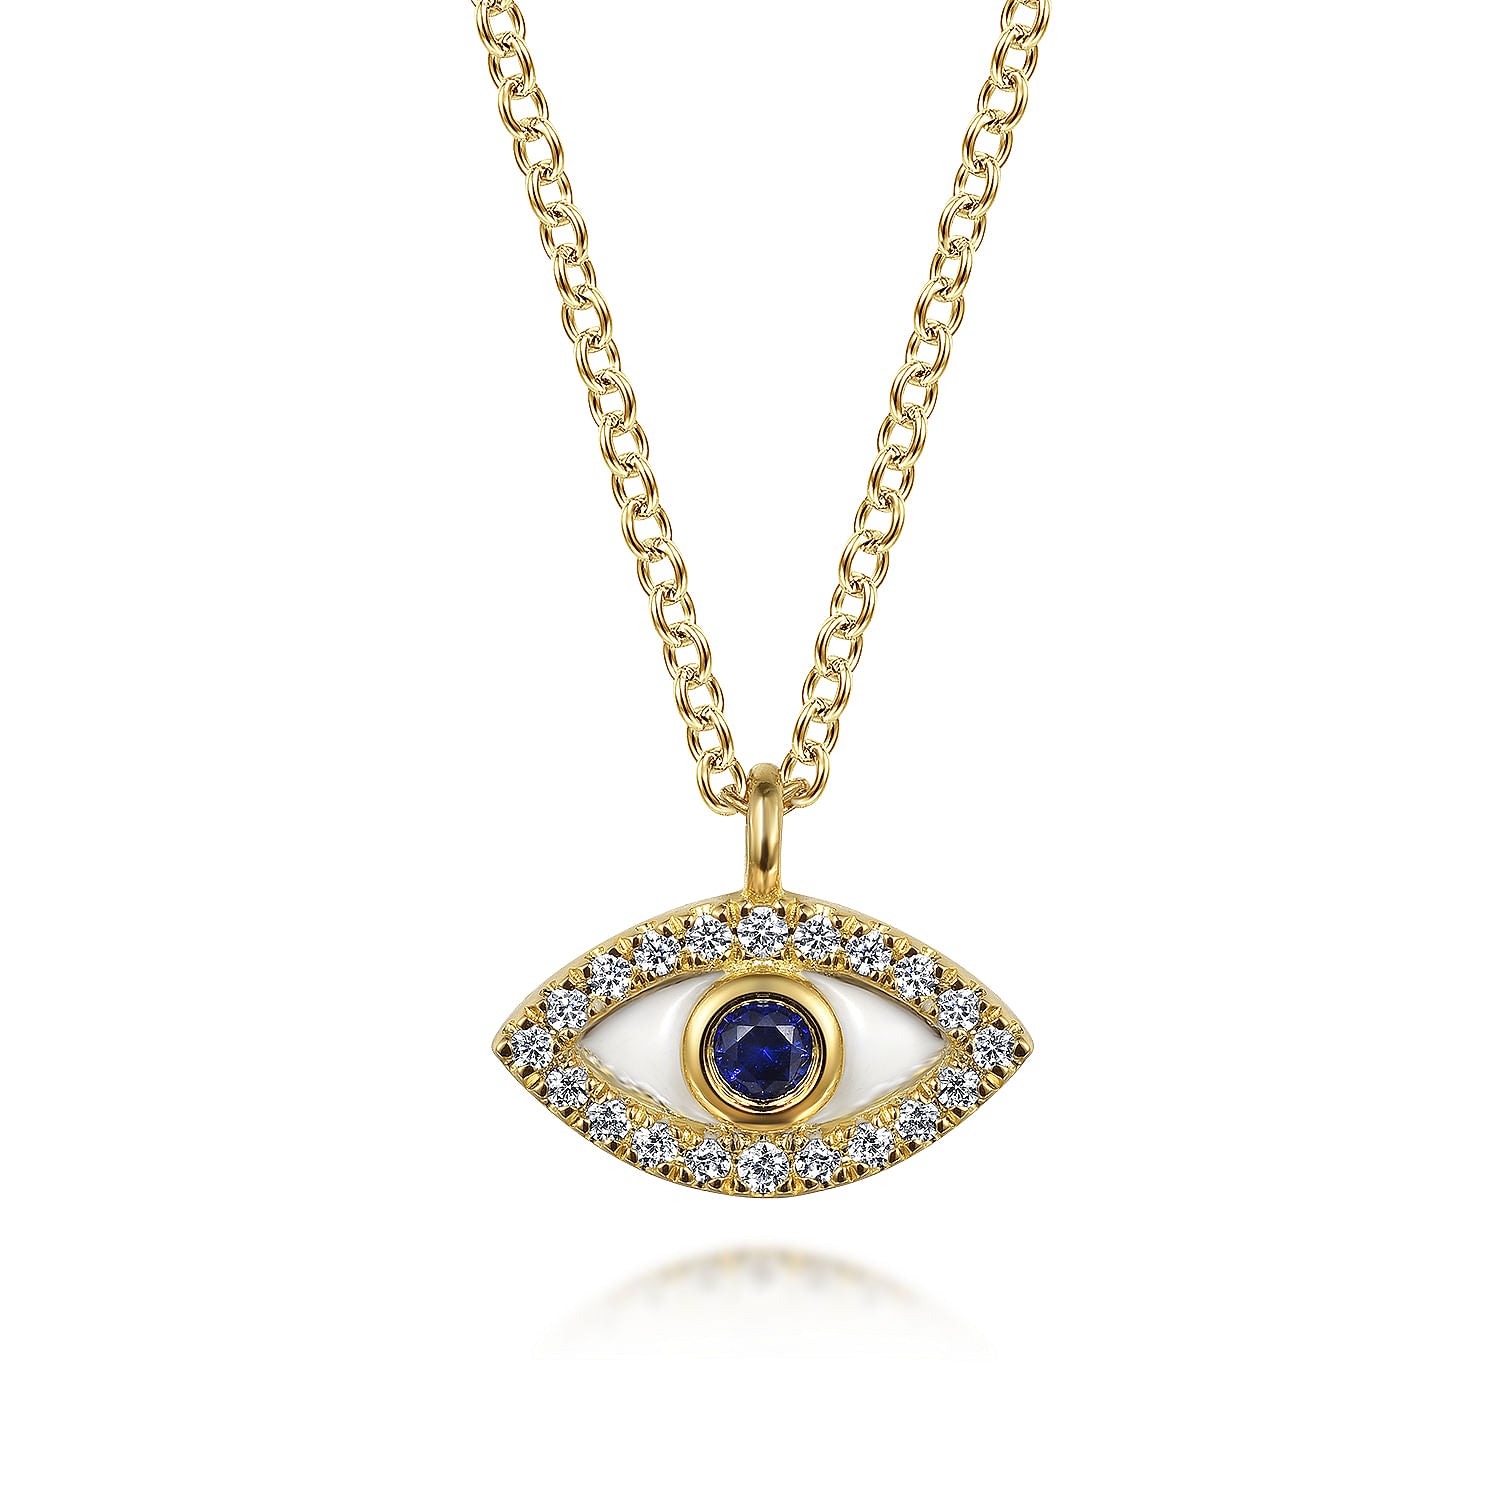 14K Yellow Gold Diamond and Sapphire Evil-Eye Pendant Necklace with White Enamel